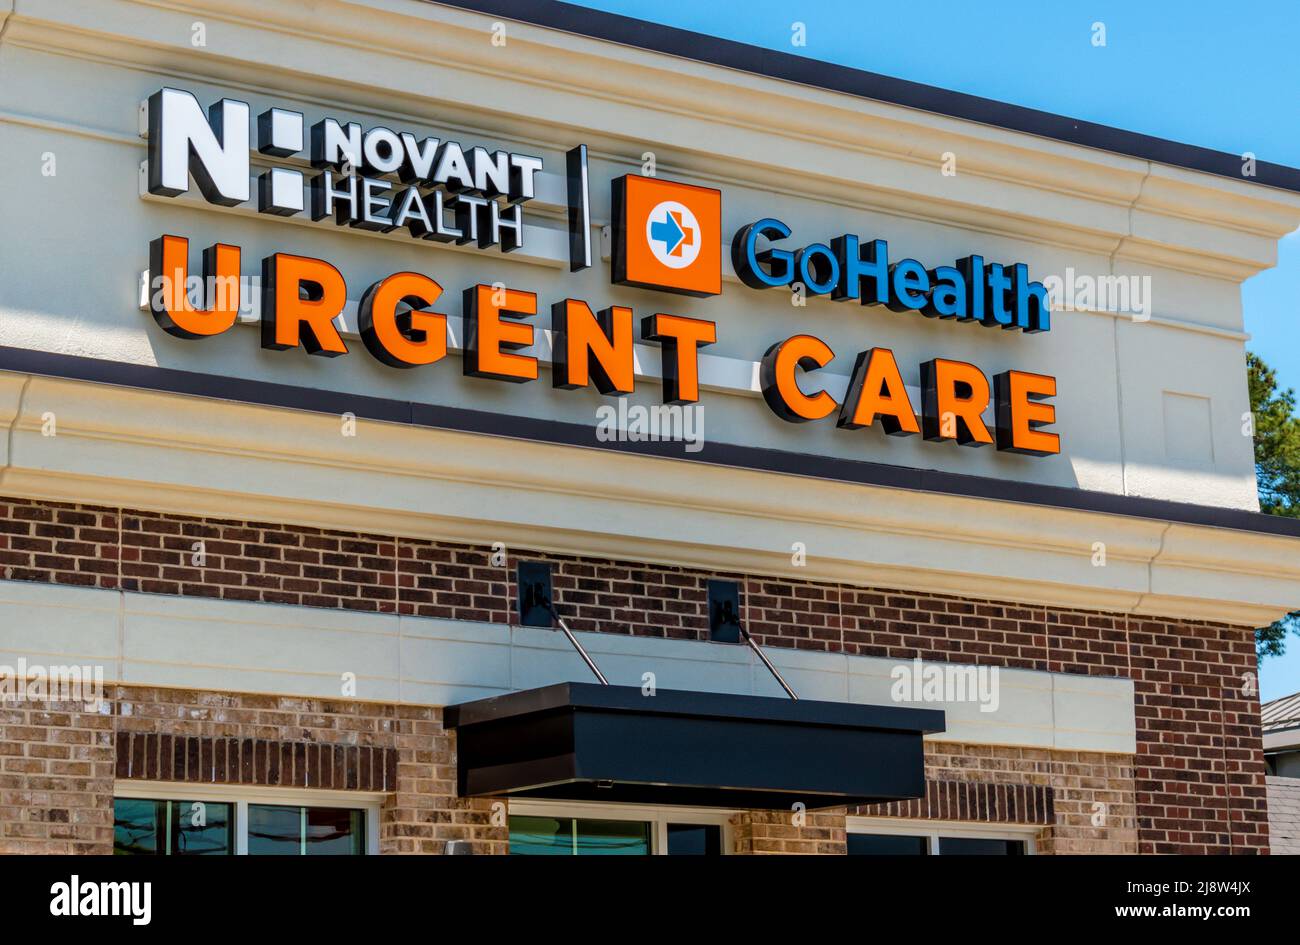 Outdoor facade brand and logo signage for 'Novant Health' Urgent Care medical facility in orange, blue and white letters on a bright sunny day. Stock Photo